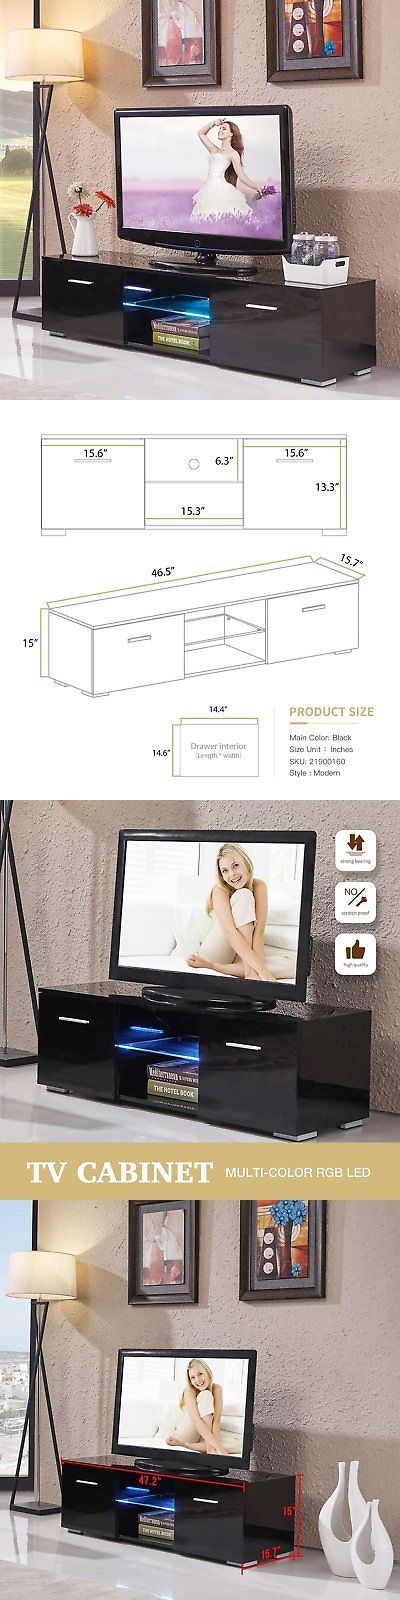 Entertainment Units Tv Stands 20488: 2 Drawers High Gloss Throughout Tv Stands With 2 Open Shelves 2 Drawers High Gloss Tv Unis (View 15 of 15)